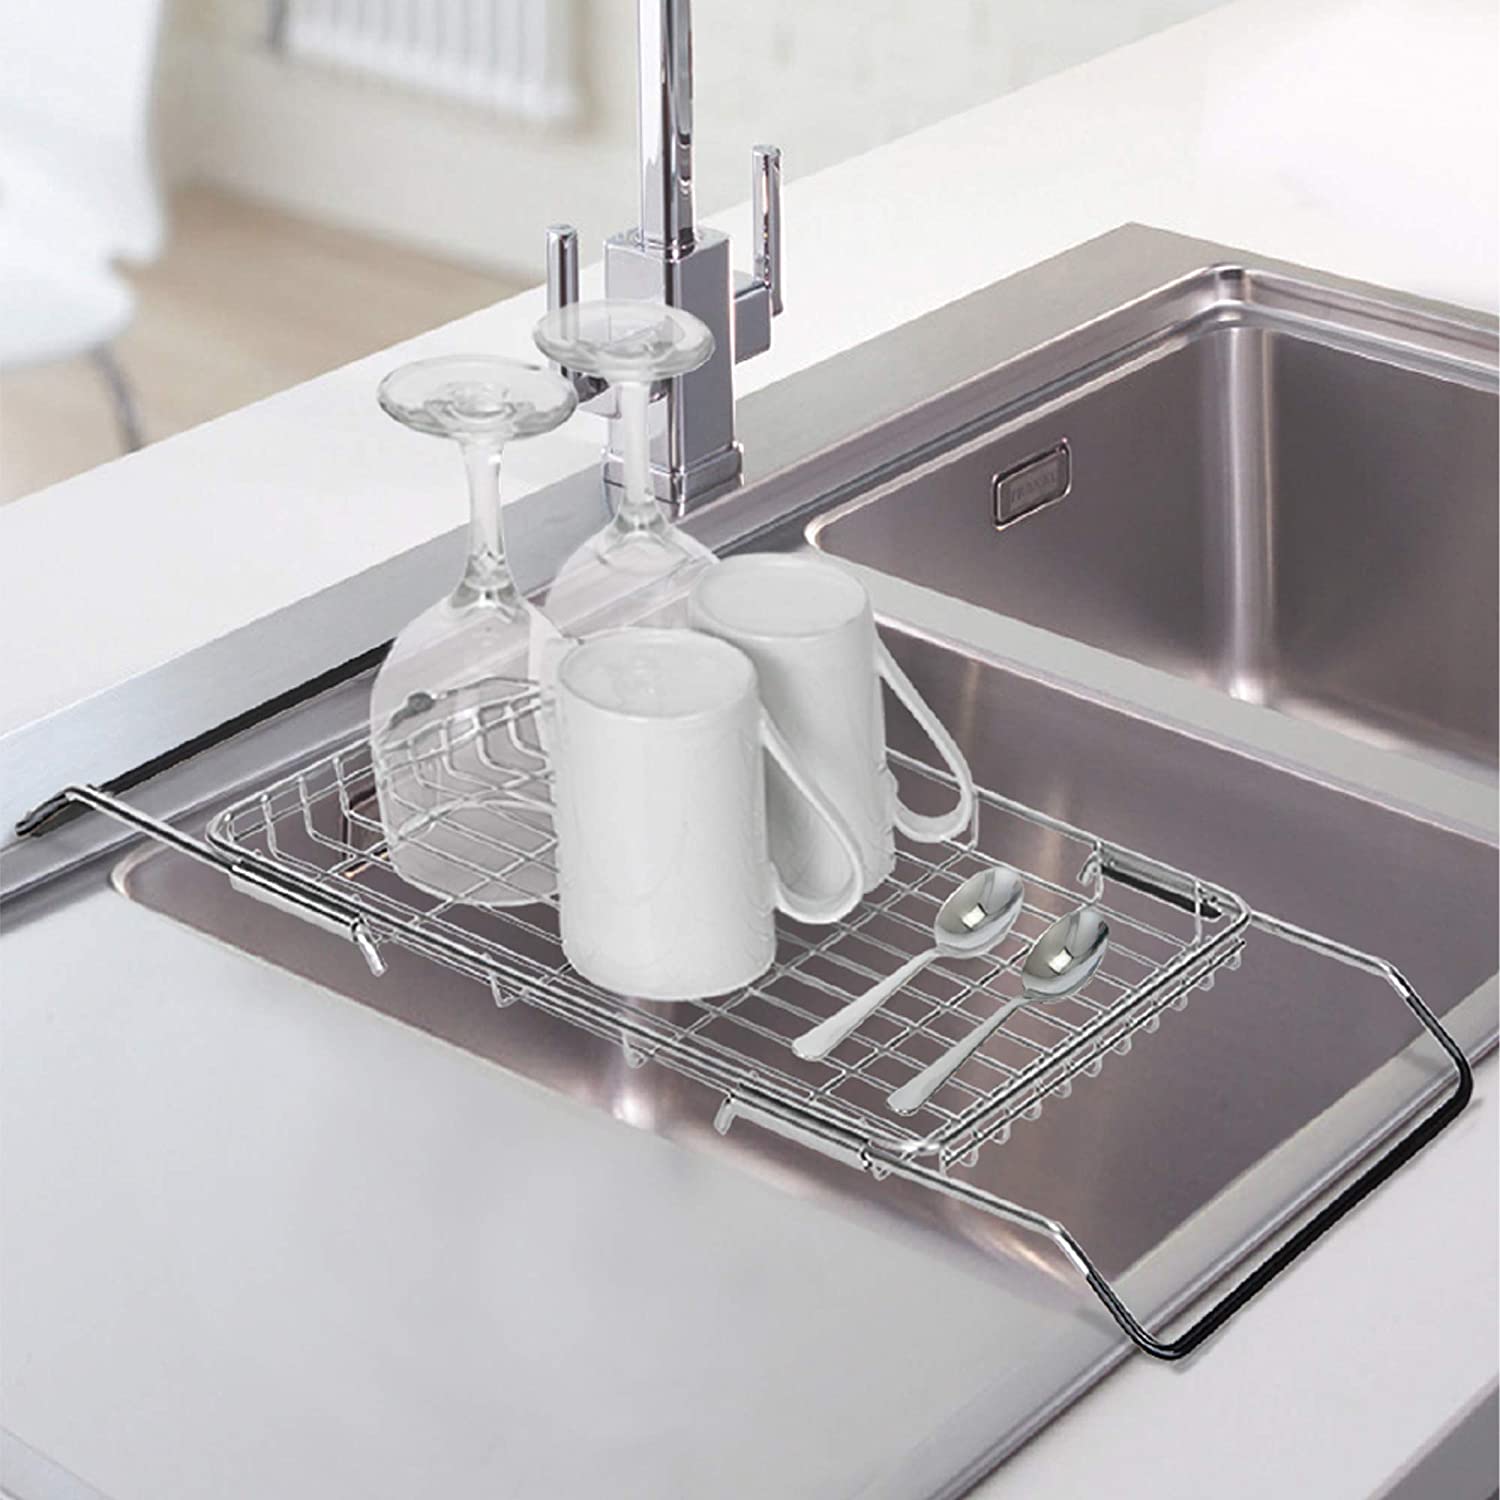 Expandable Dish Drainer with Adjustable Arms - Smart Design® 7